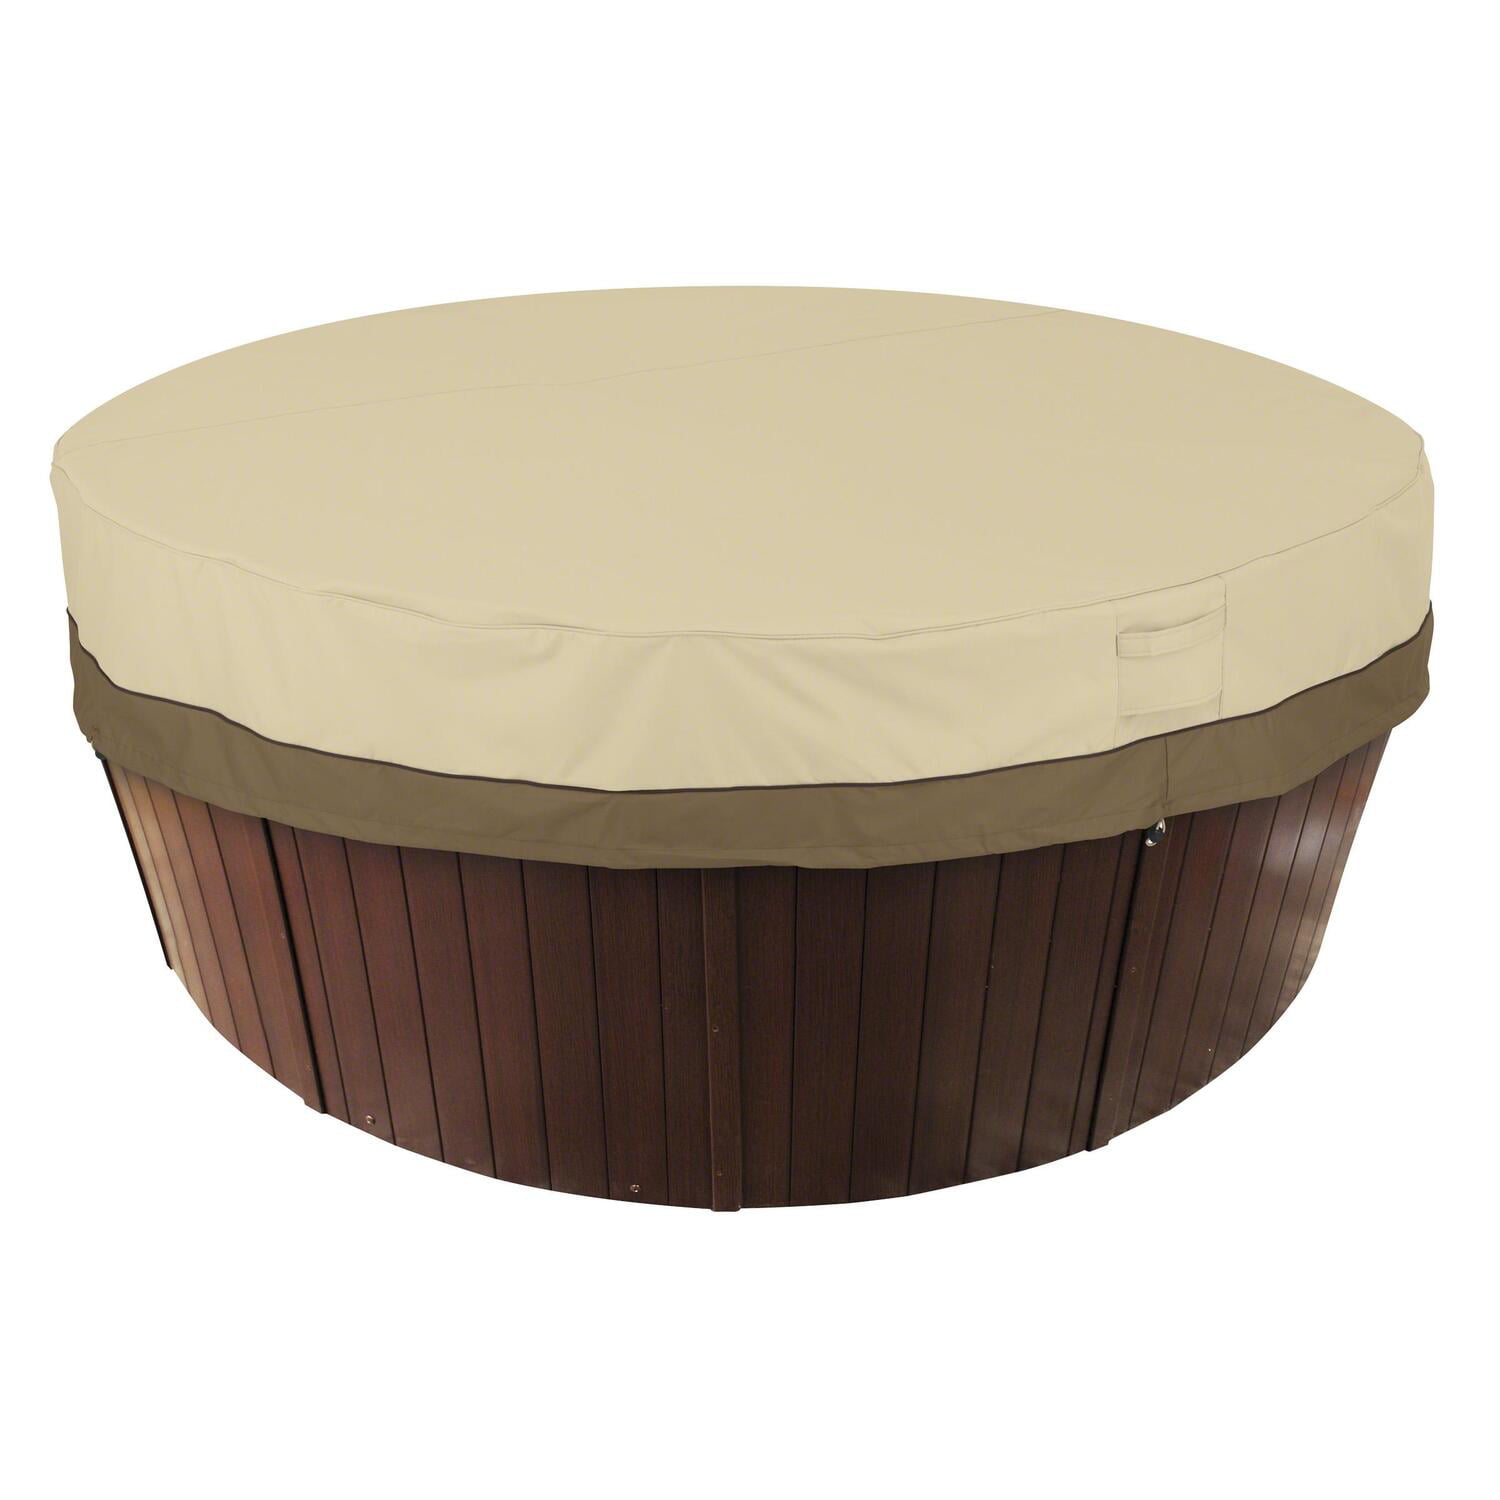 Budge ALLSEASONS 94x94 Square Hot Tub Cover Large Tan Weather Proof Spa Top for sale online 